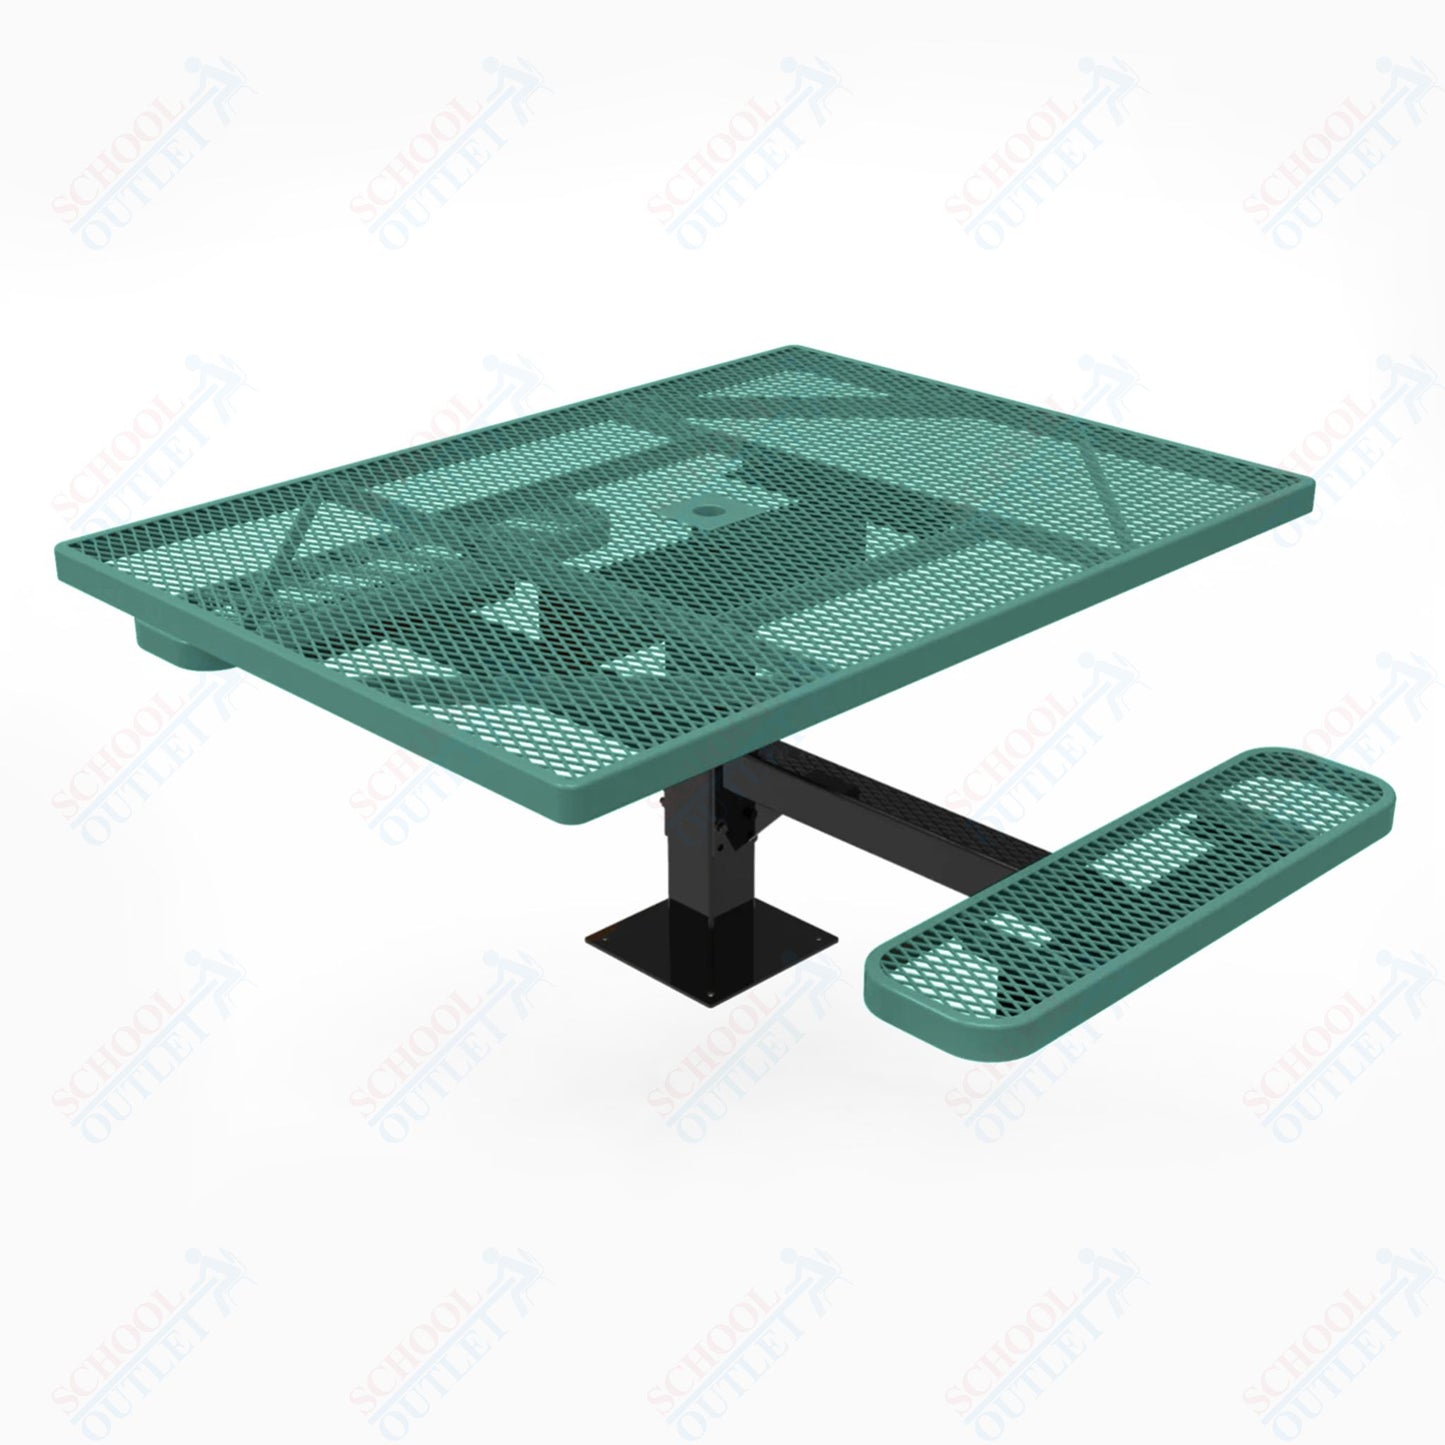 MyTcoat MYT-TSQ46-17-012 46″ Square Pedestal Picnic Table with Surface Mount, 2 Seat and Alternate ADA Accessible (77"W x 63"D x 30"H)